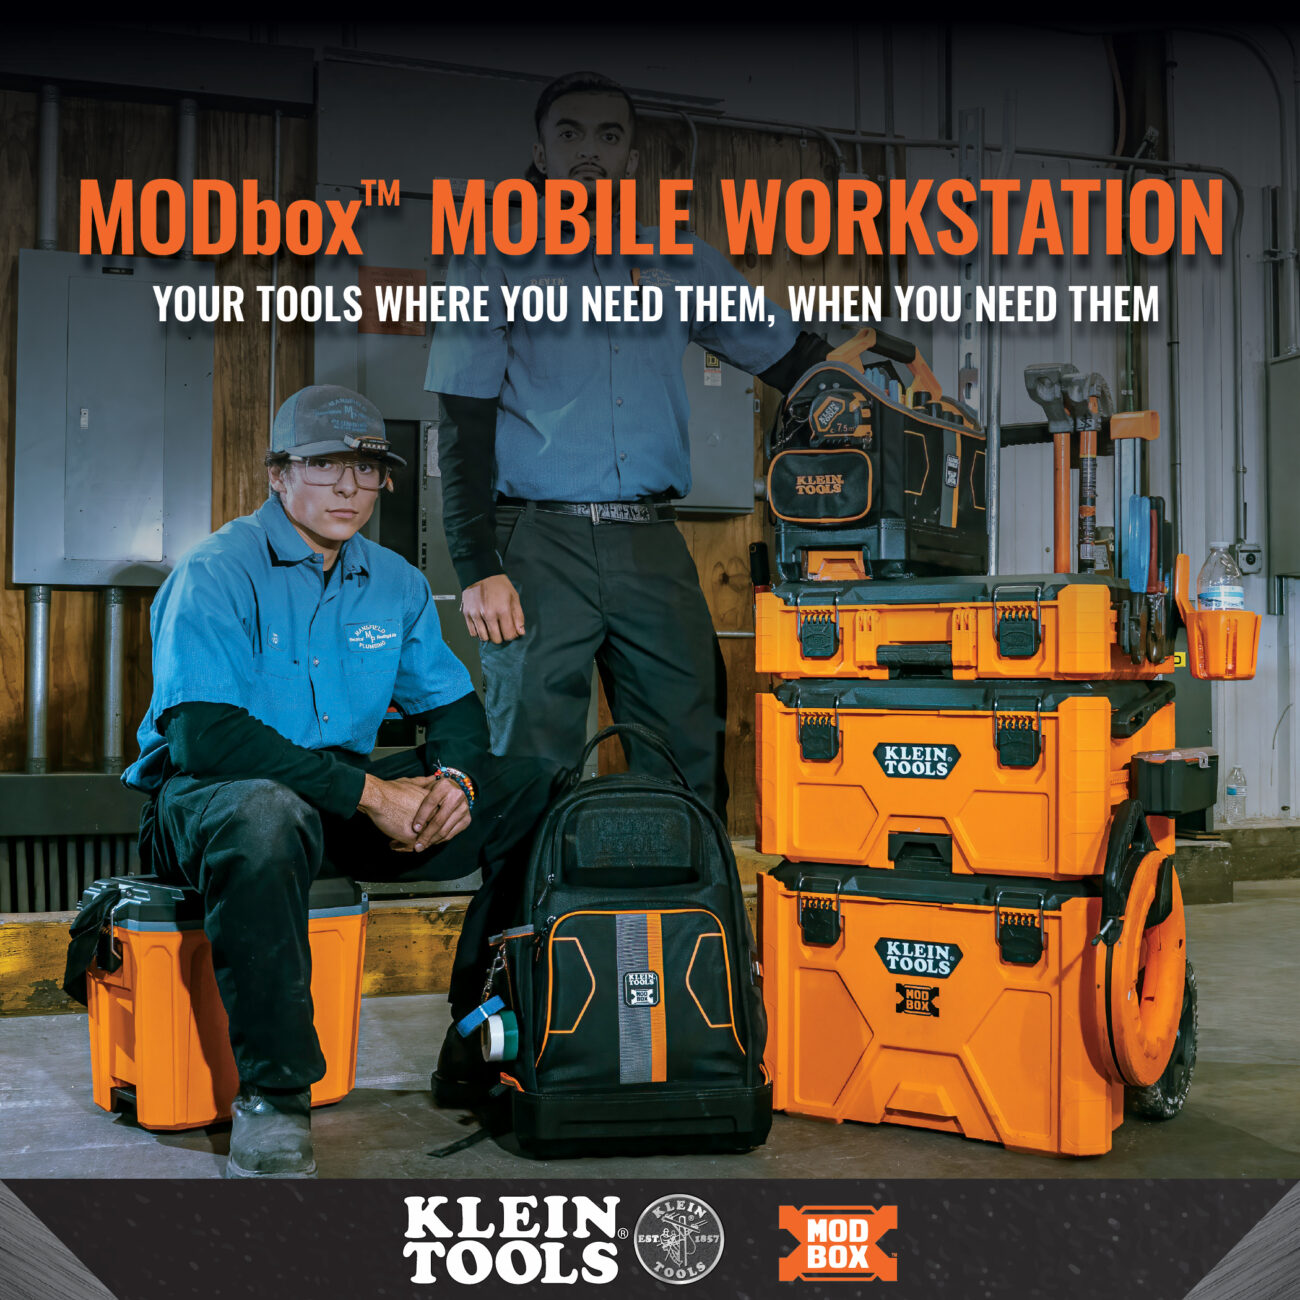 MODbox workstation all tools on display at the jobsite